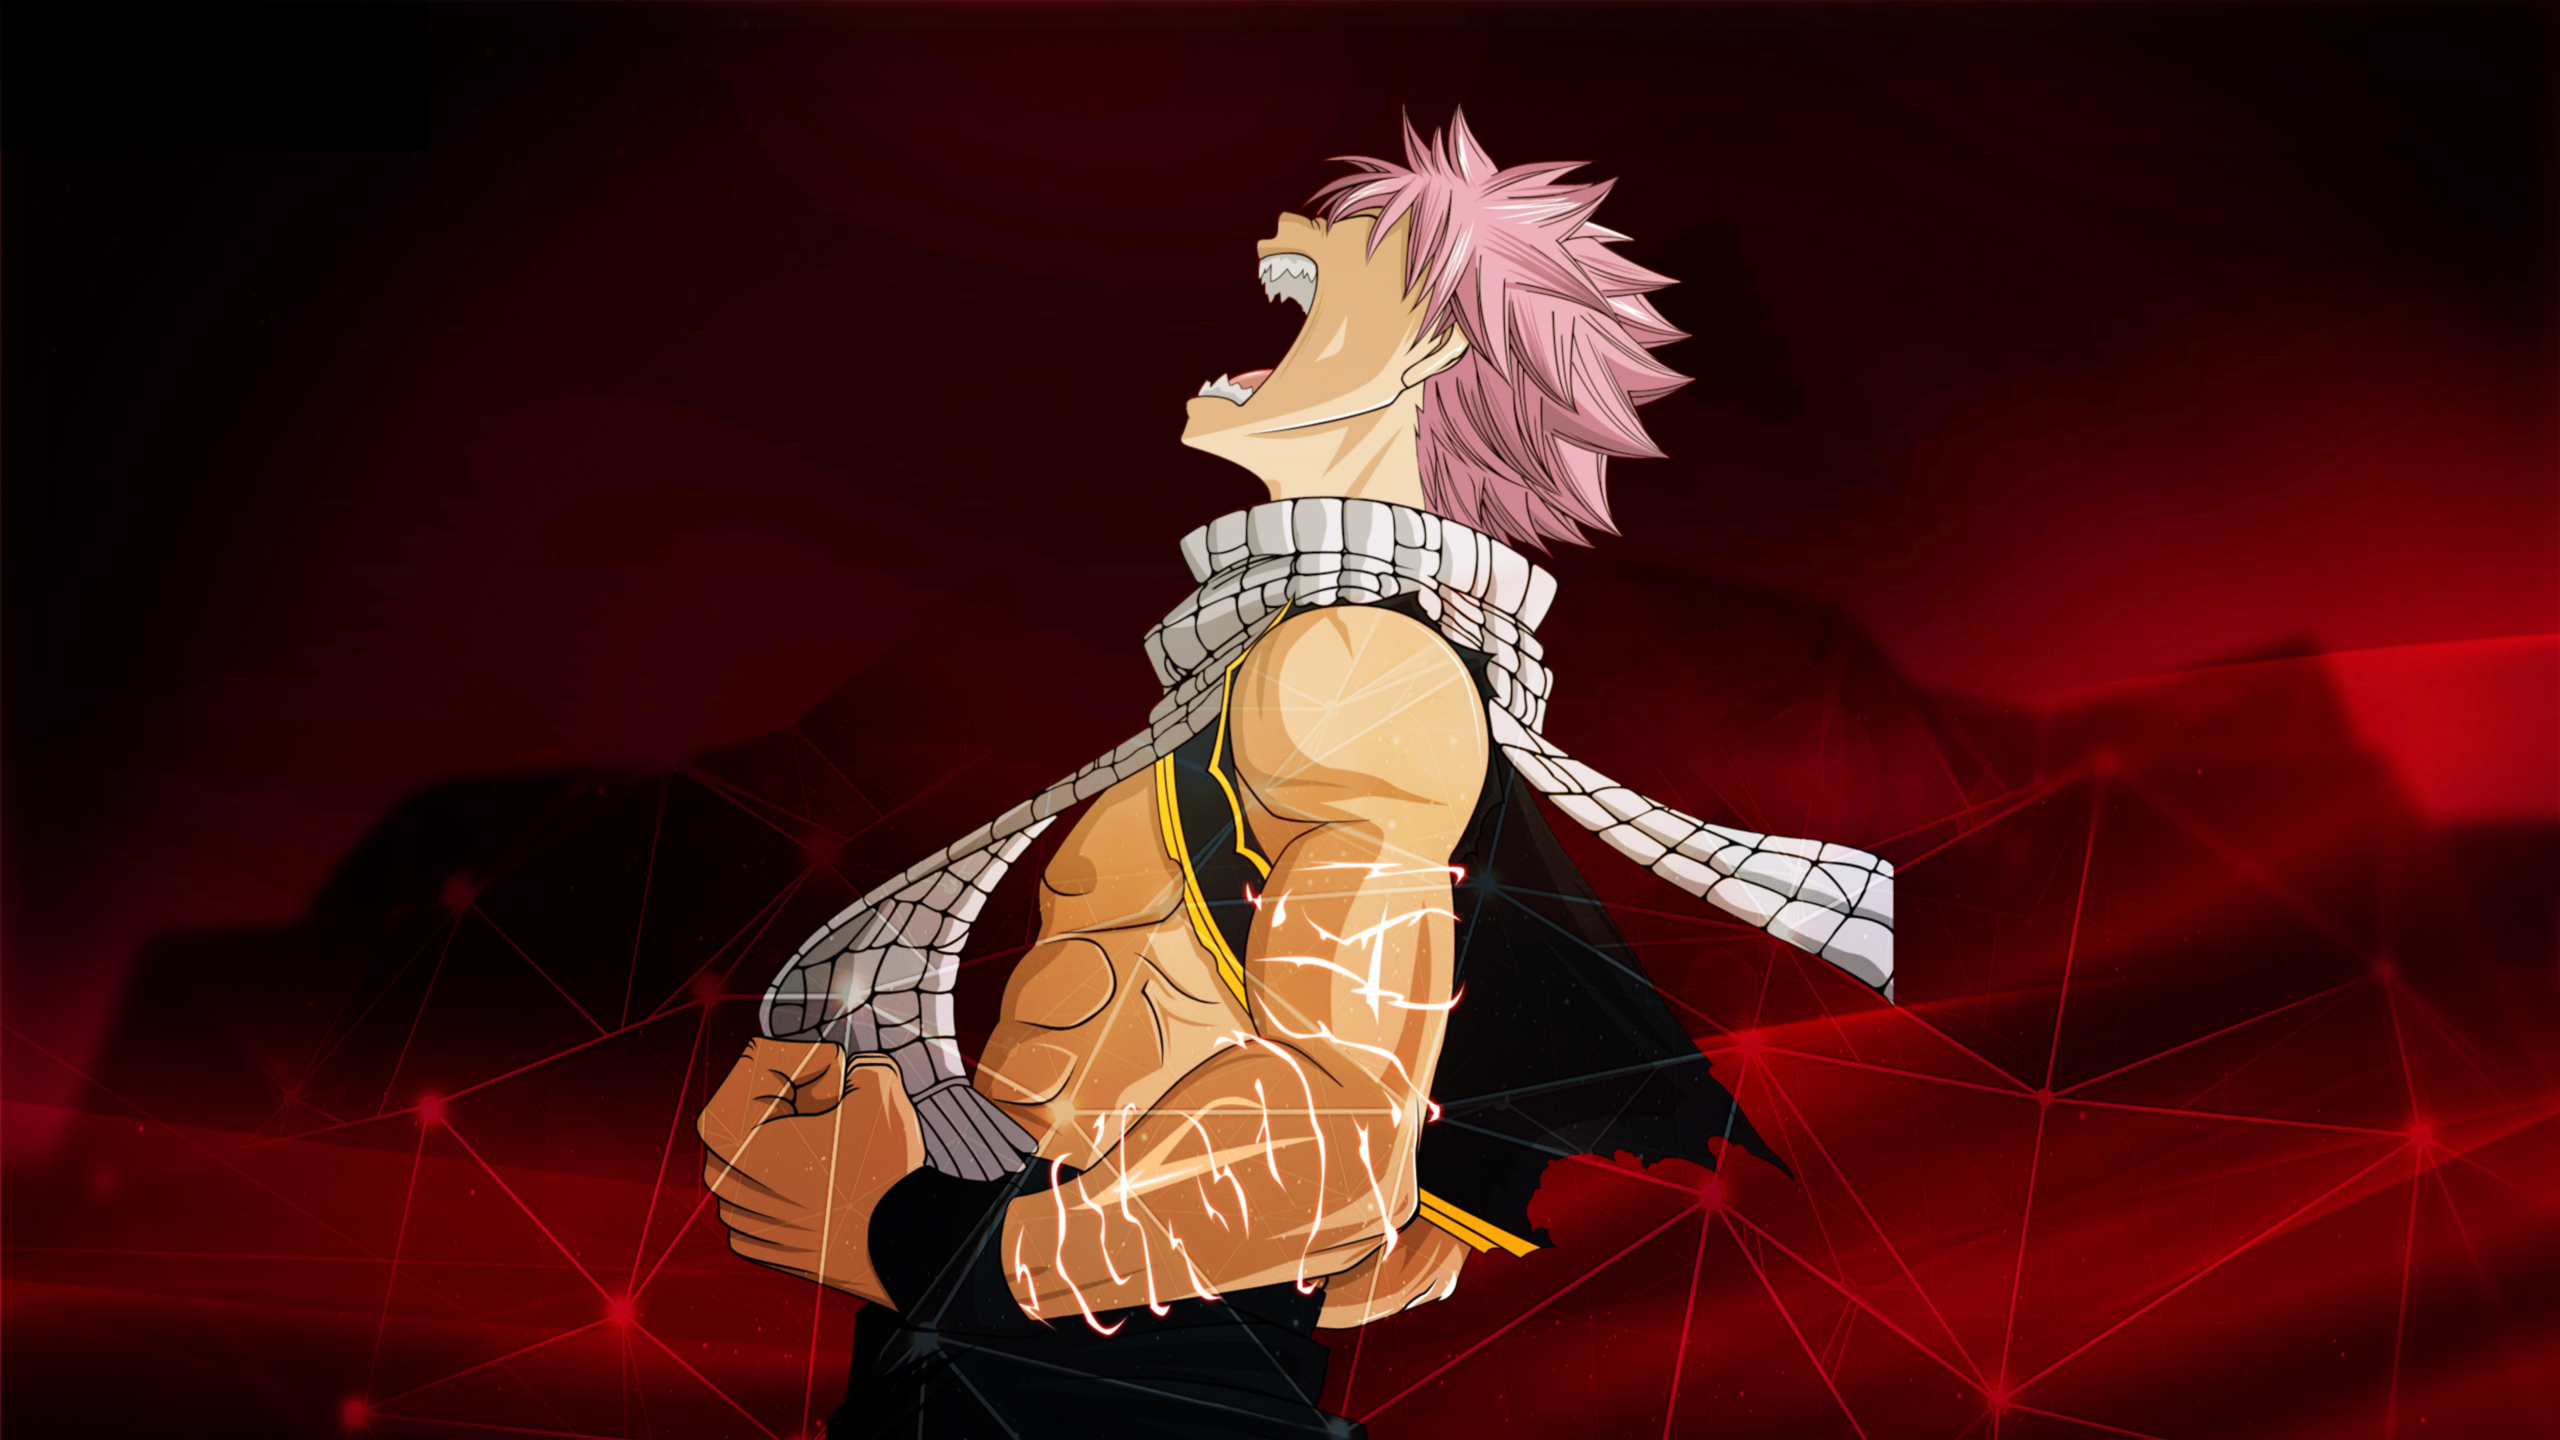 Fairy Tail Natsu Wallpaper : Tons of awesome natsu dragneel fairy tail wallpapers to download ...